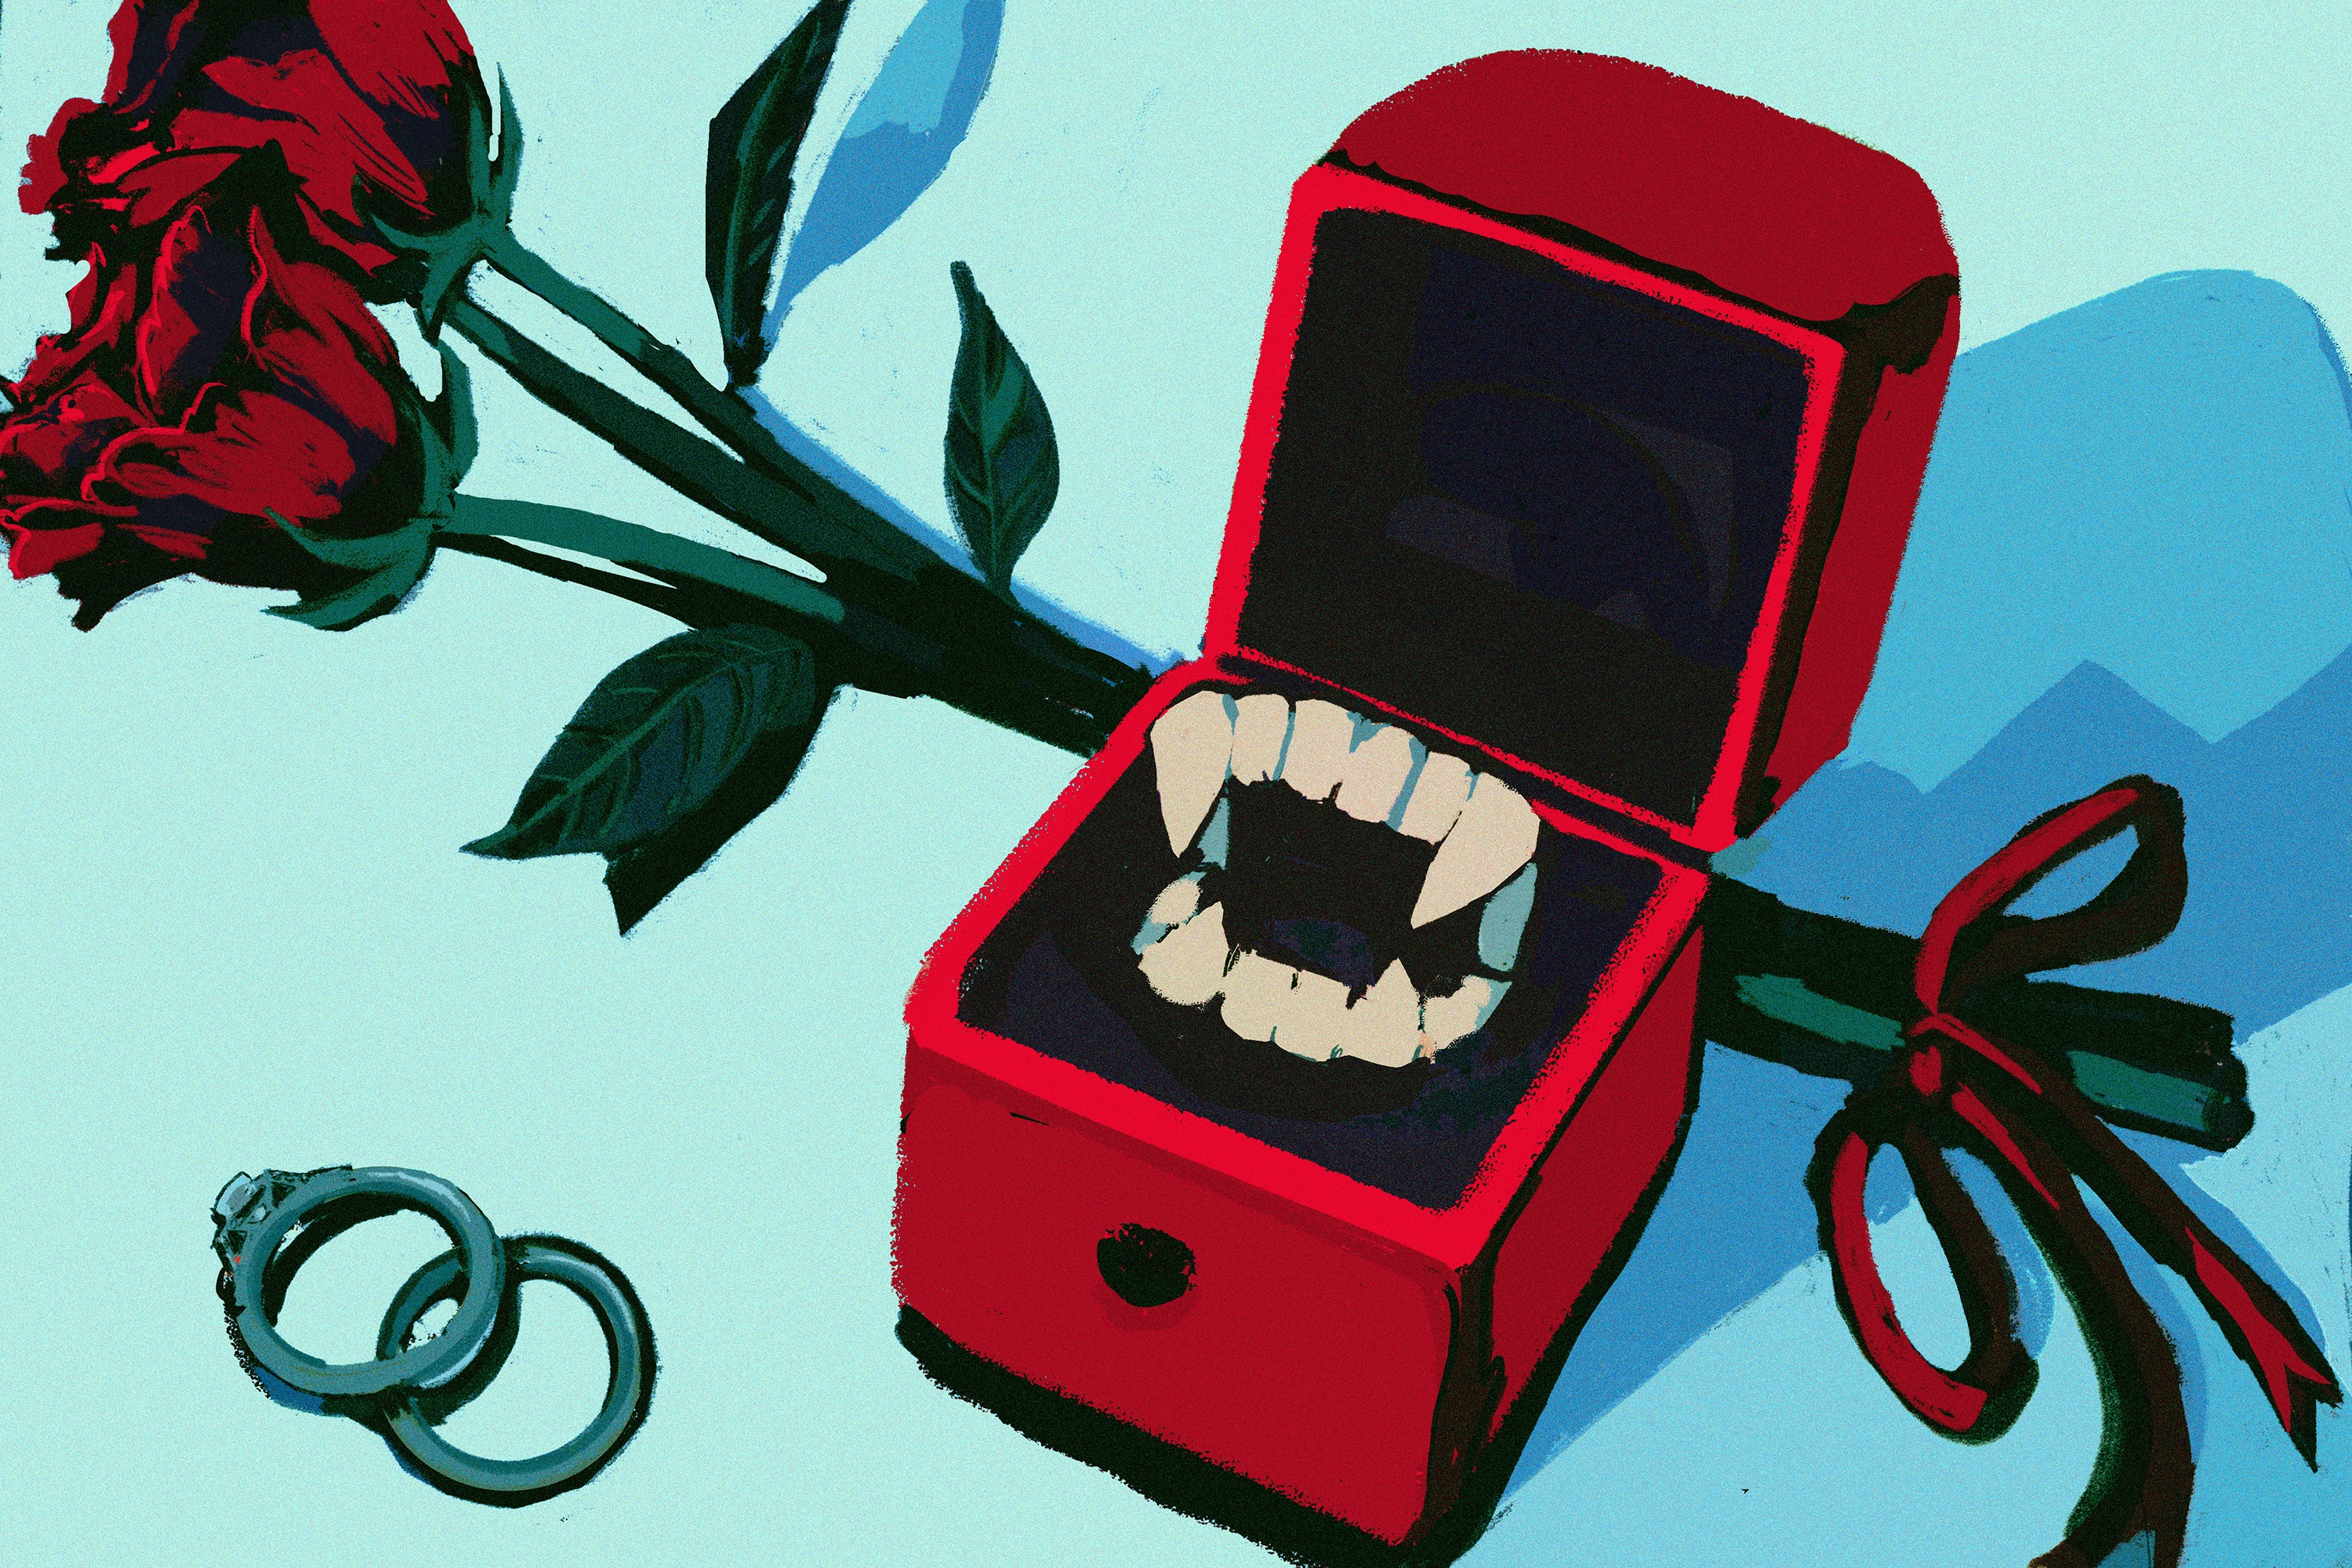 An original illustration shows vampire fangs inside a red wedding ring box, with two roses on the side.